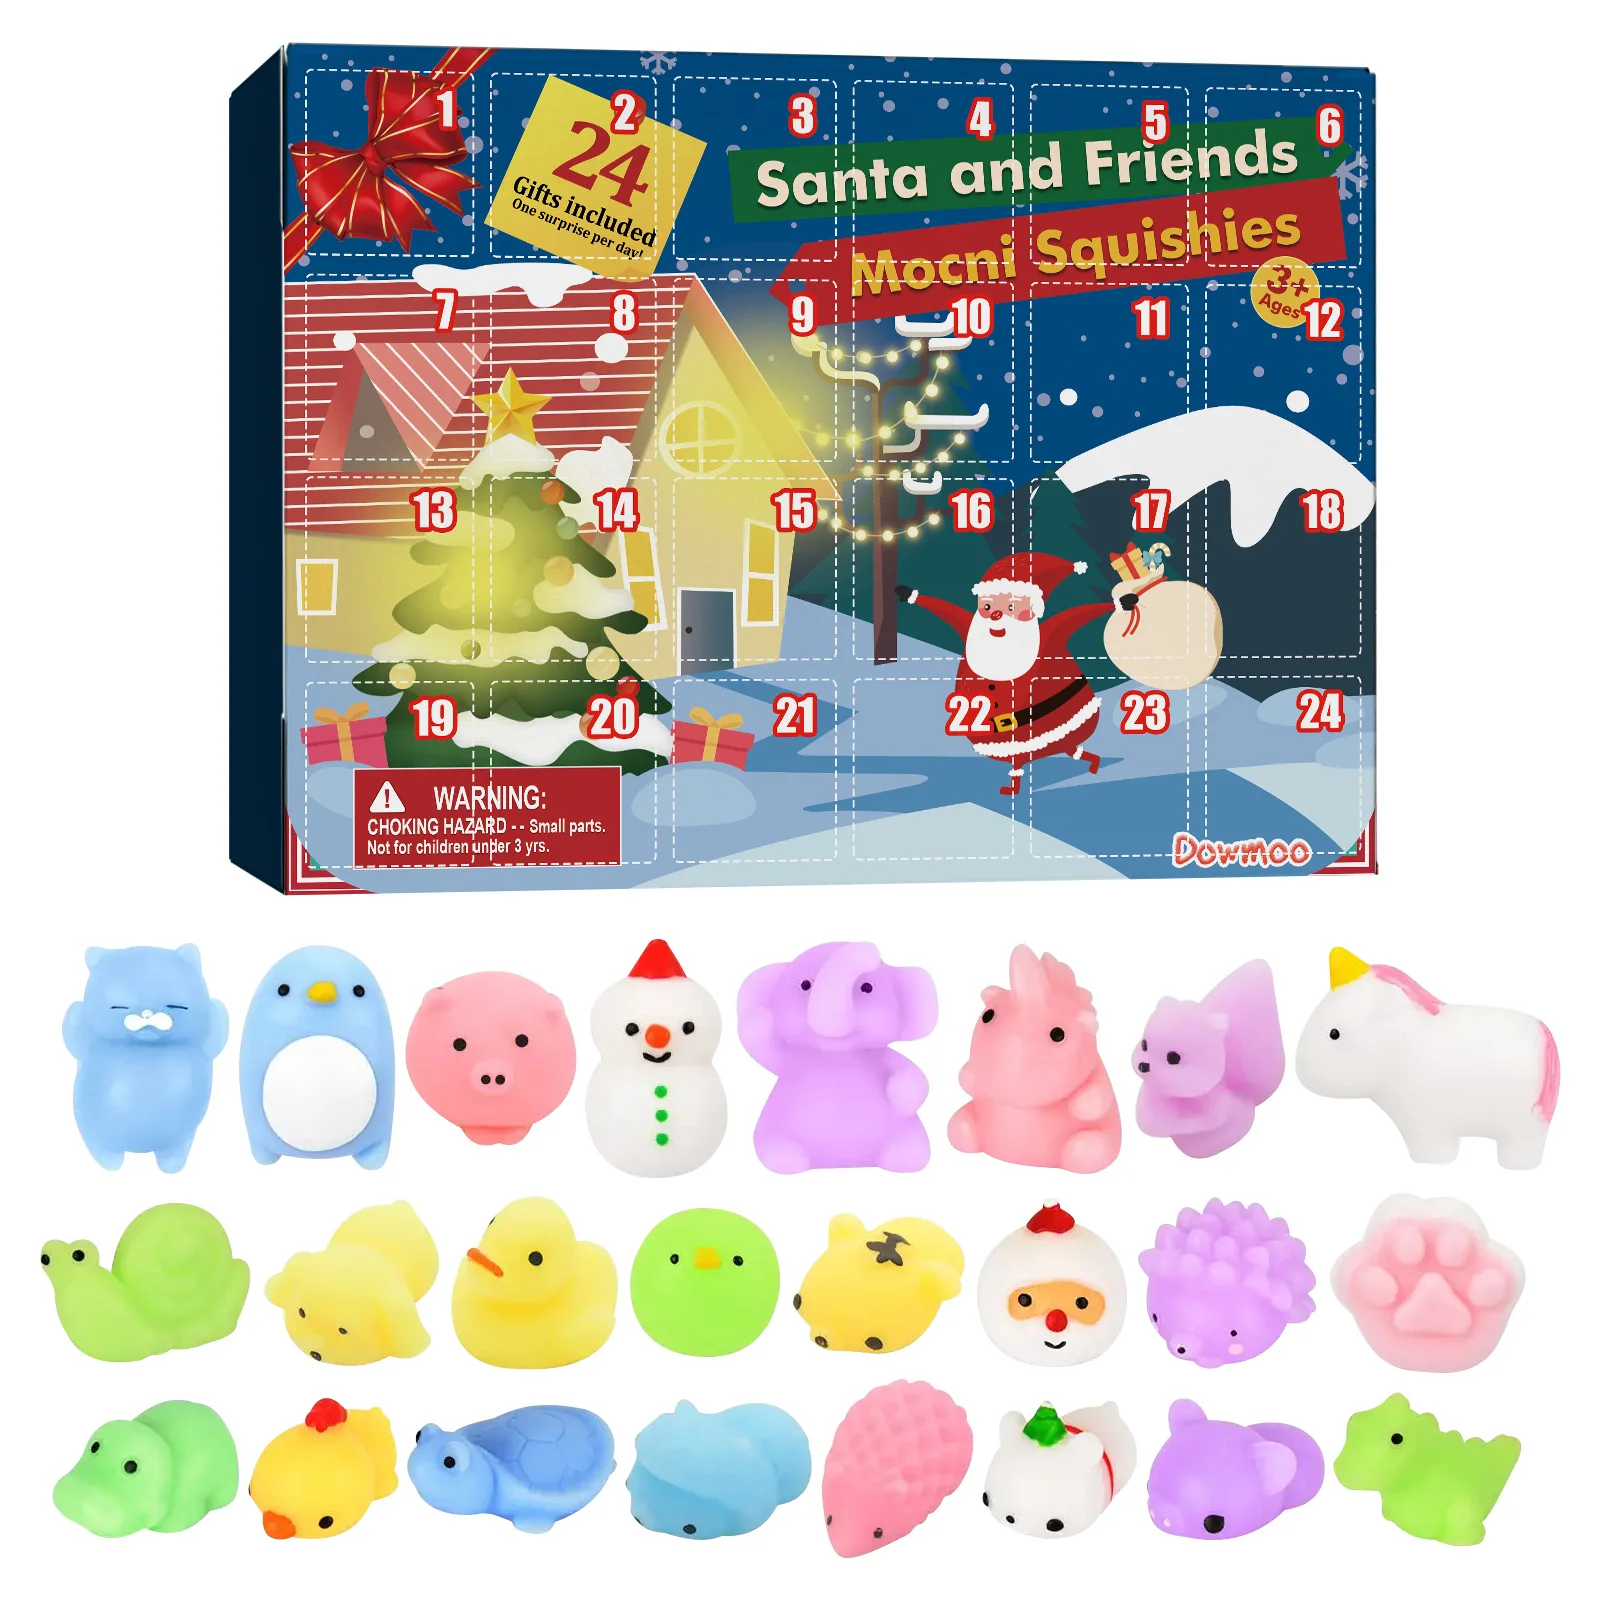 

Christmas Advent Calendar 24 Days Countdown Surprise Blind Box Squishy Cute Animals Decompression Toys for Kids Adult Gifts